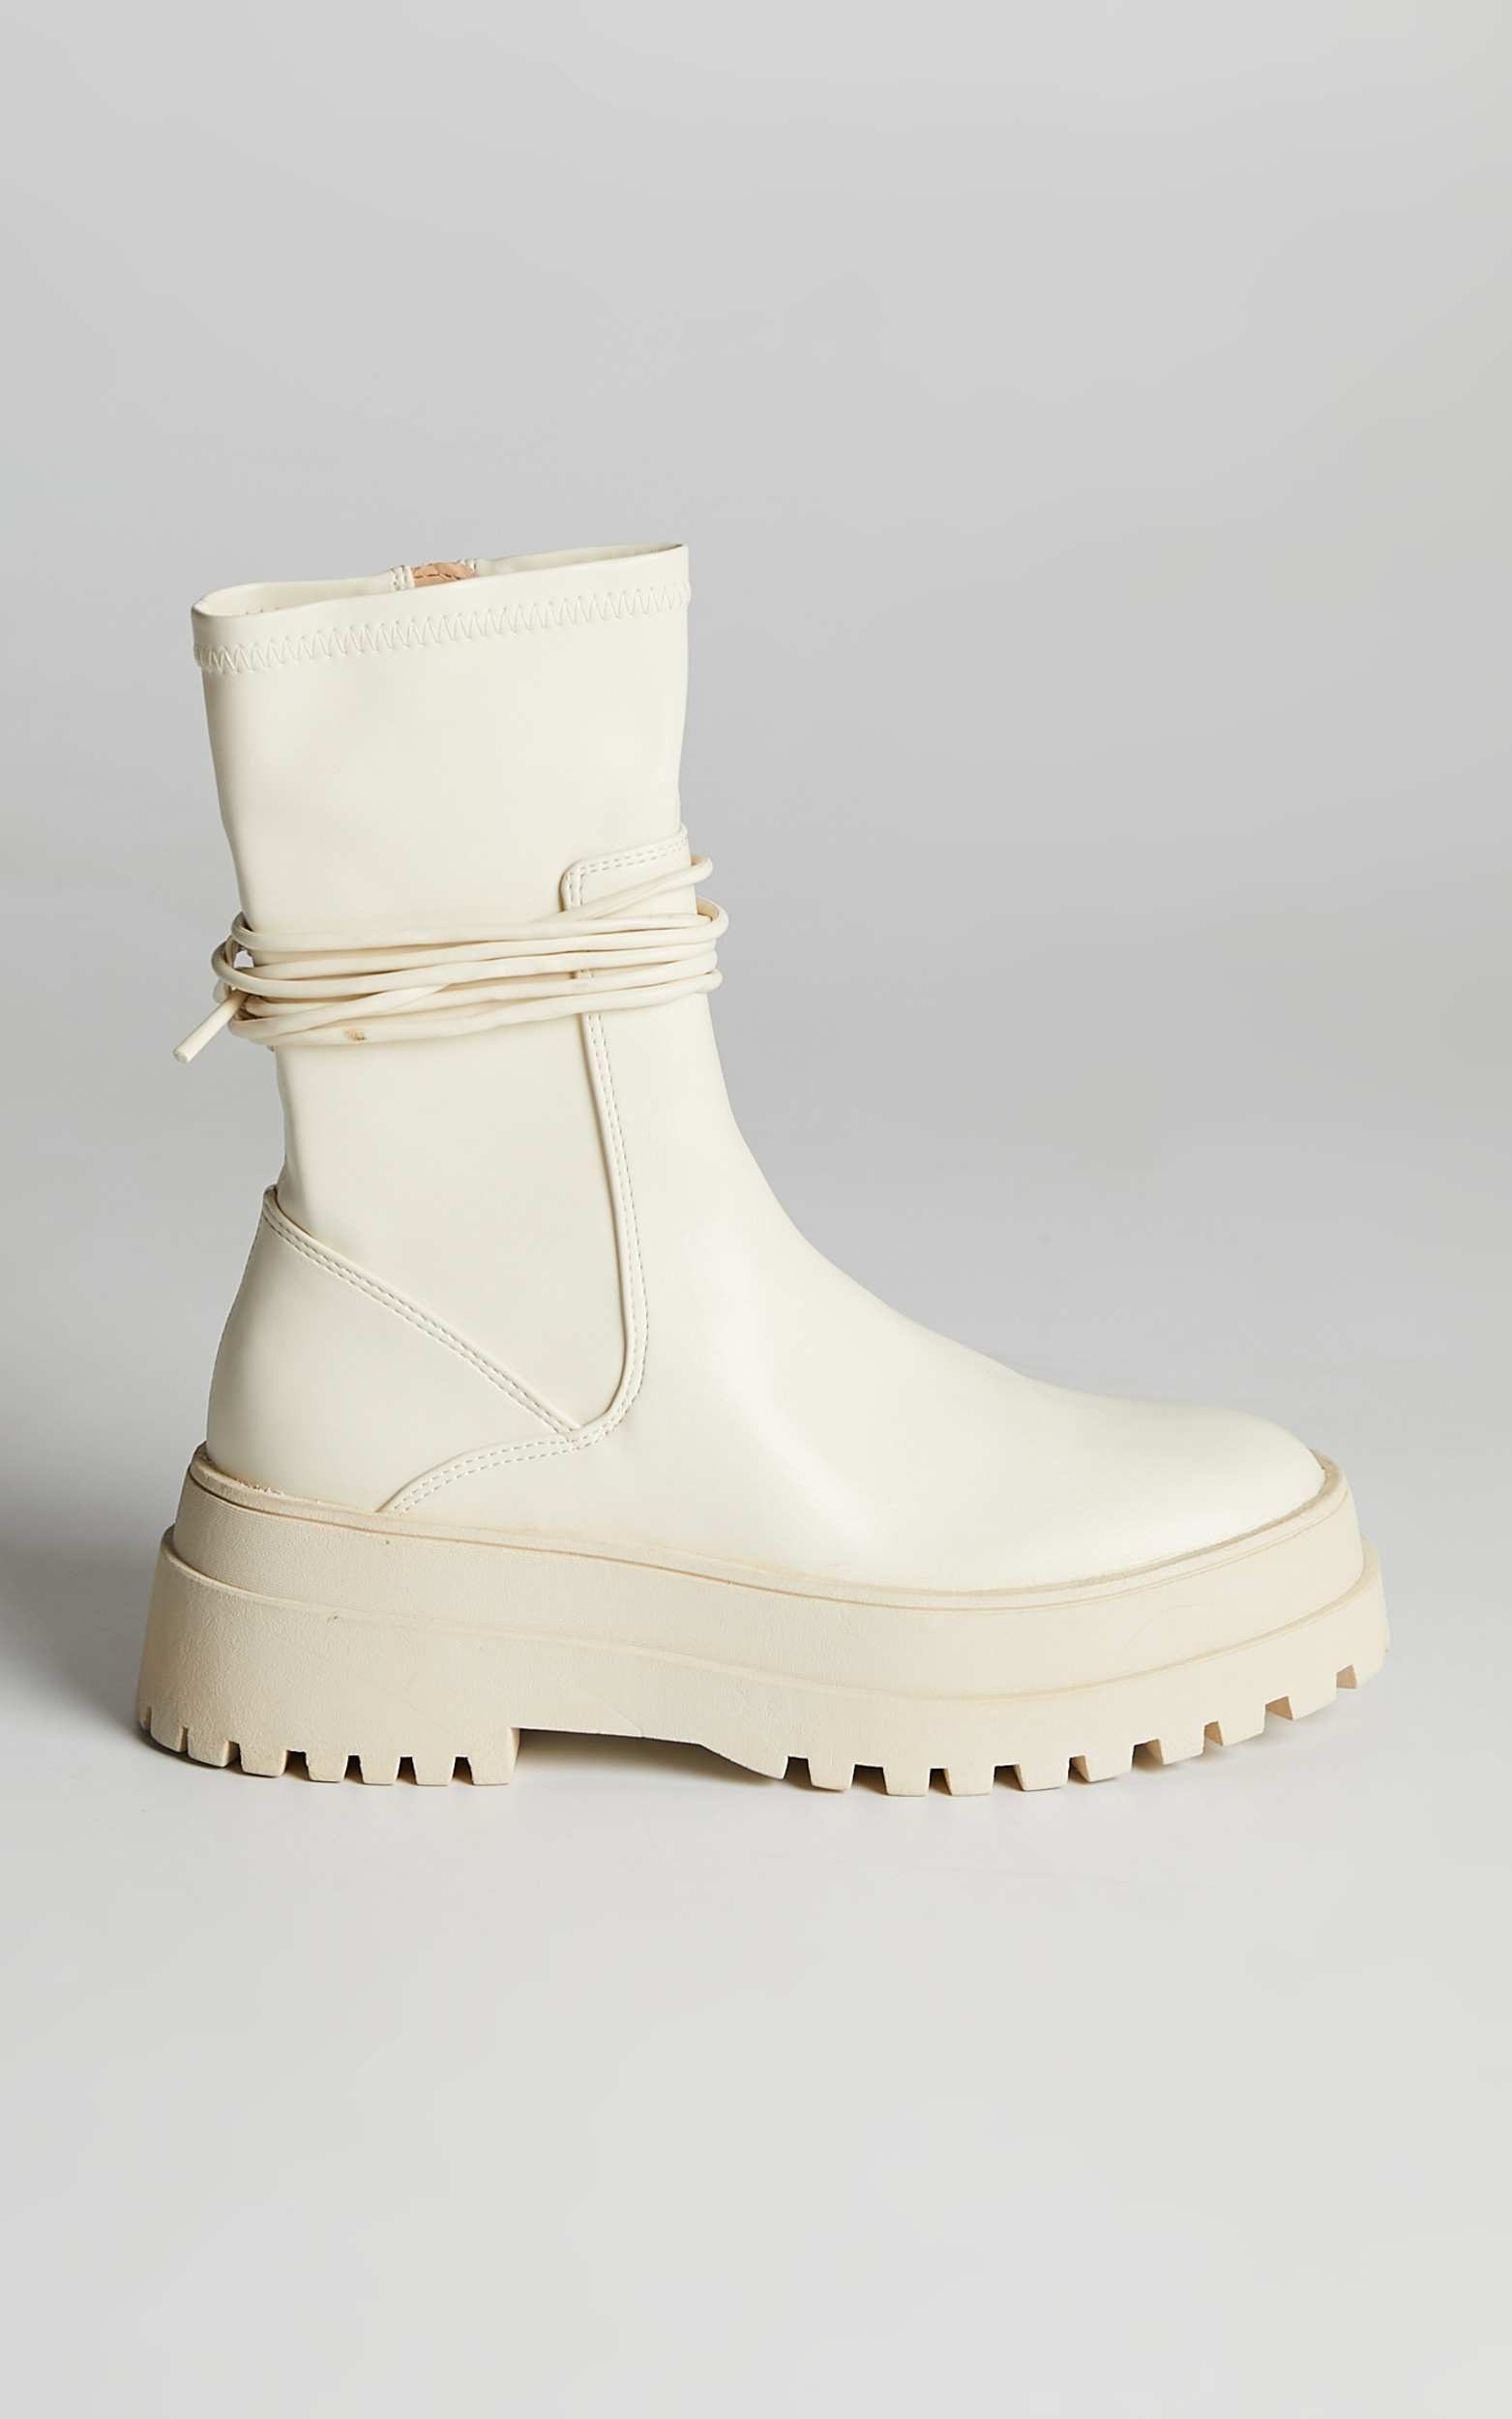 Public Desire - Finale Boots in Cream PU - 05, CRE1, hi-res image number null